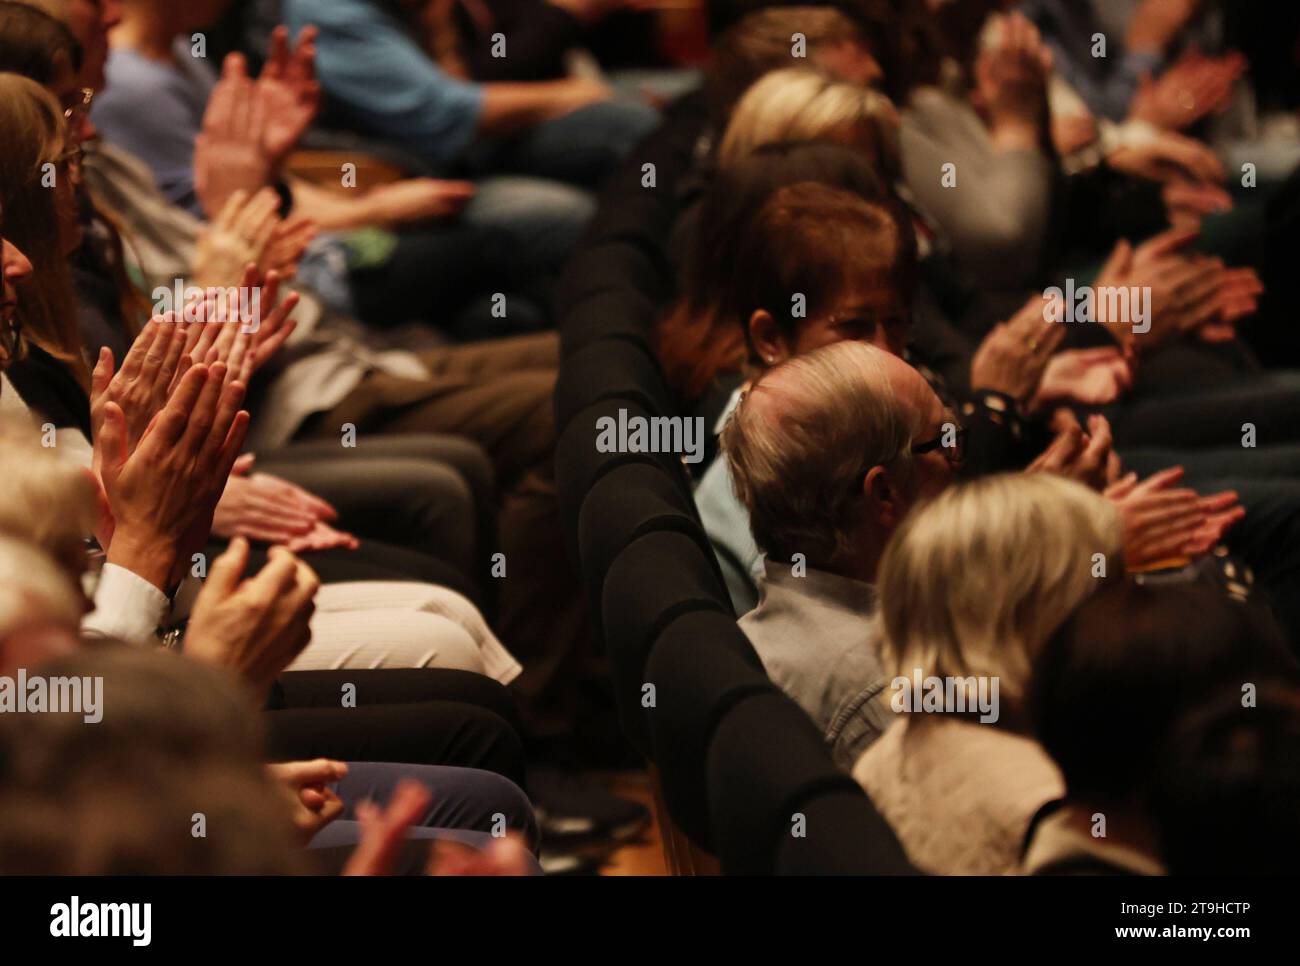 Theater Erfurt 25.11.2023, Erfurt, Theater, Zuschauer auf den Raengen klatschen *** Theater Erfurt 25 11 2023, Erfurt, Theatre, audience clapping on the rafters Credit: Imago/Alamy Live News Foto Stock